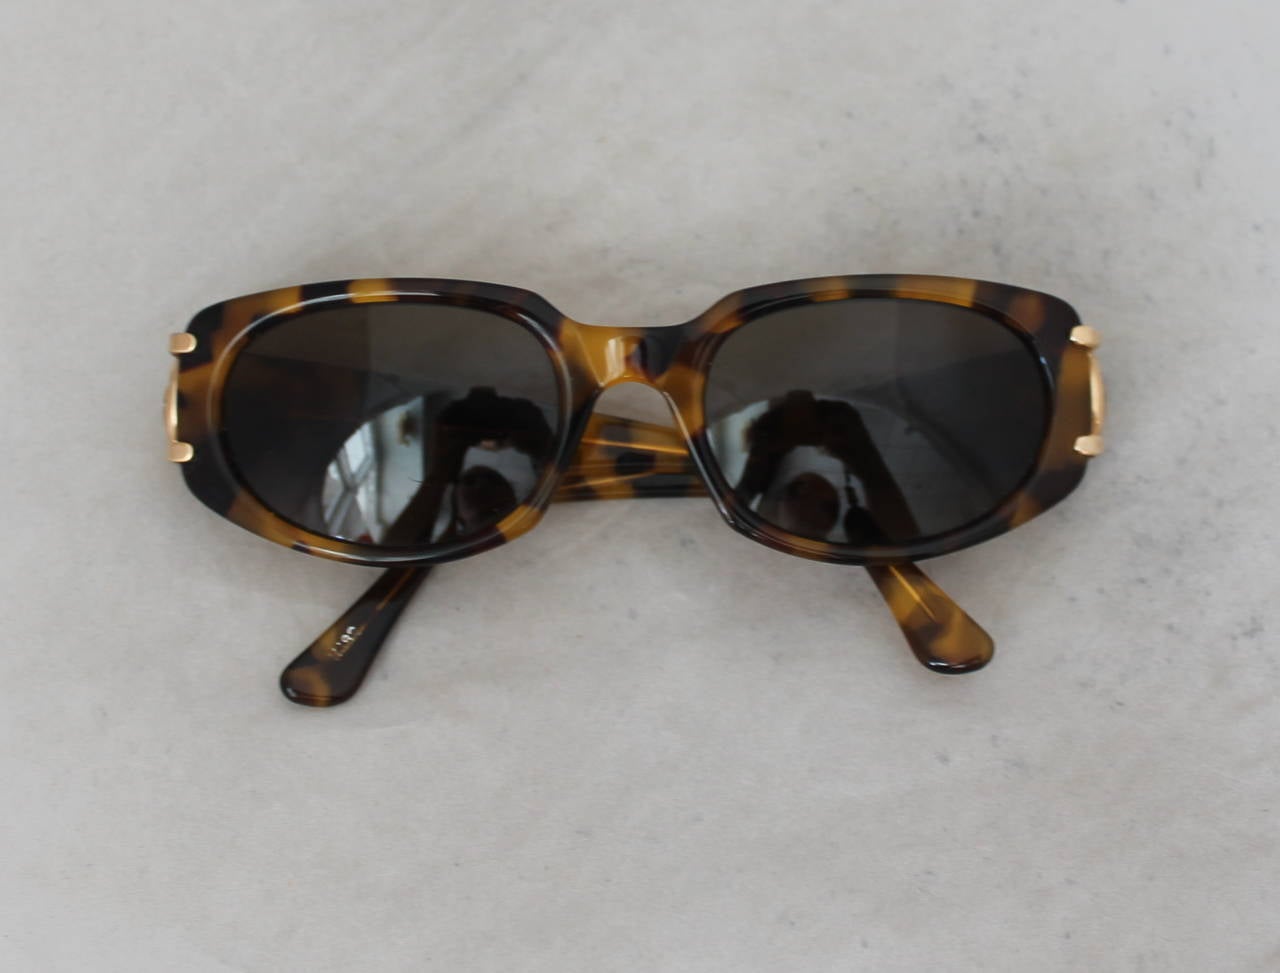 Jean Patou 1980's Vintage Tortoise Sunglasses. These sunglasses are in very good vintage condition with minor wear. The only issue this piece has is that the legs are a little loose and need to be tightened (image 5). 

Frame to Frame Length-